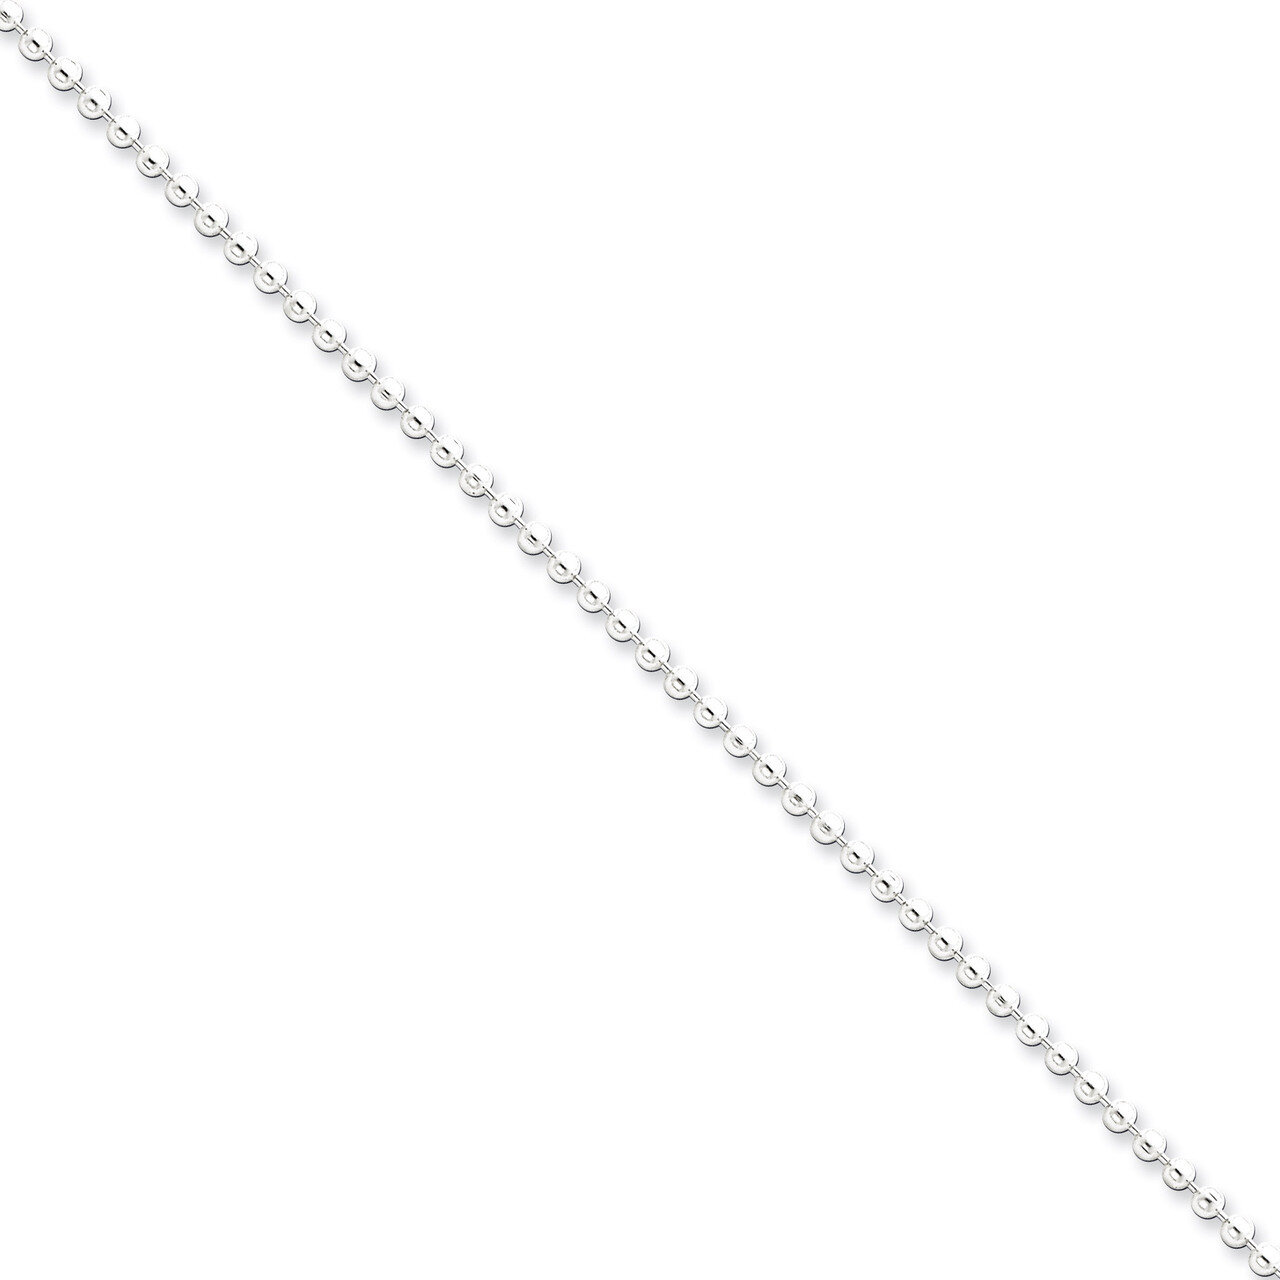 16 Inch 2.35mm Beaded Chain Sterling Silver QK82-16